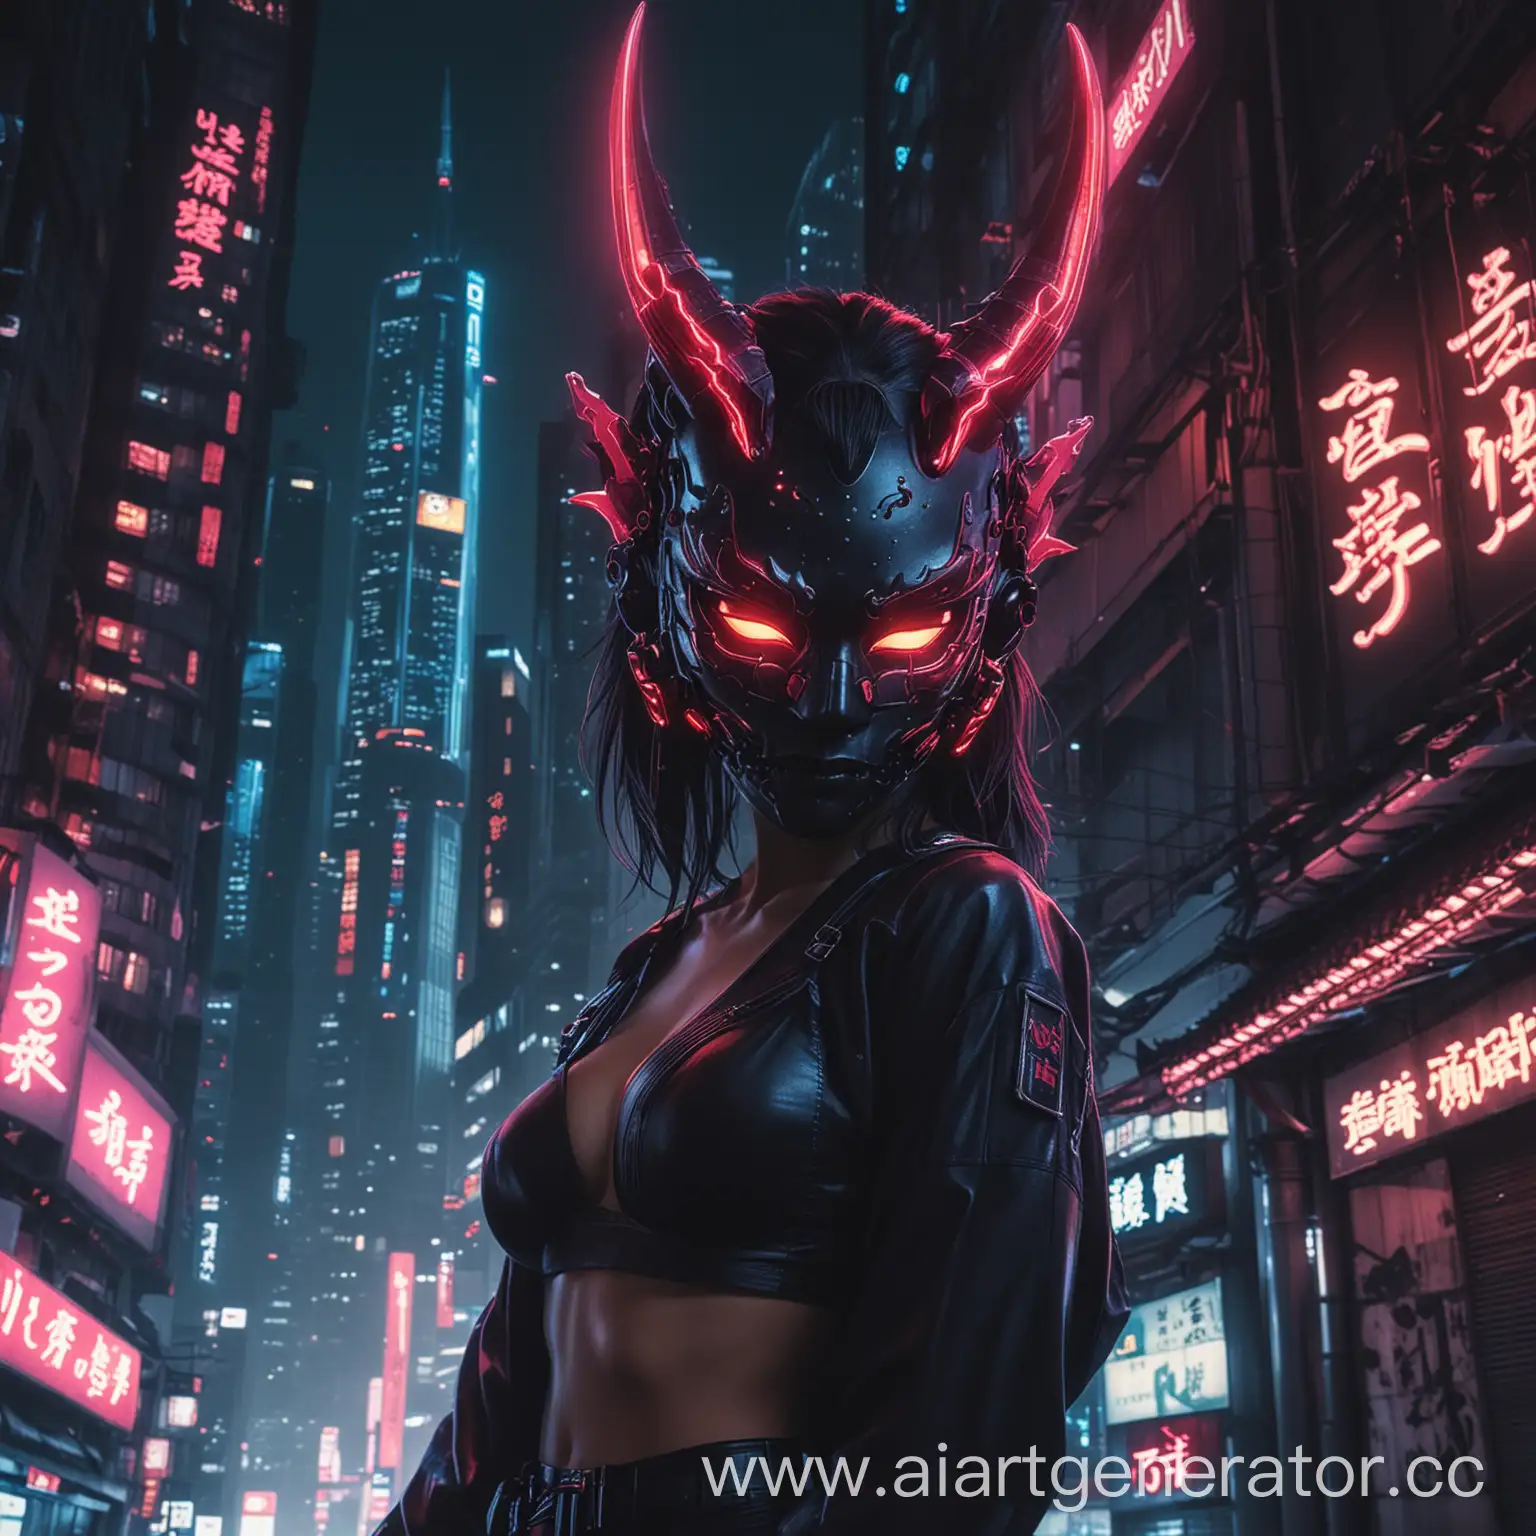 Cyberpunk-Girl-in-Oni-Mask-Amidst-Japanese-Skyscrapers-at-Night